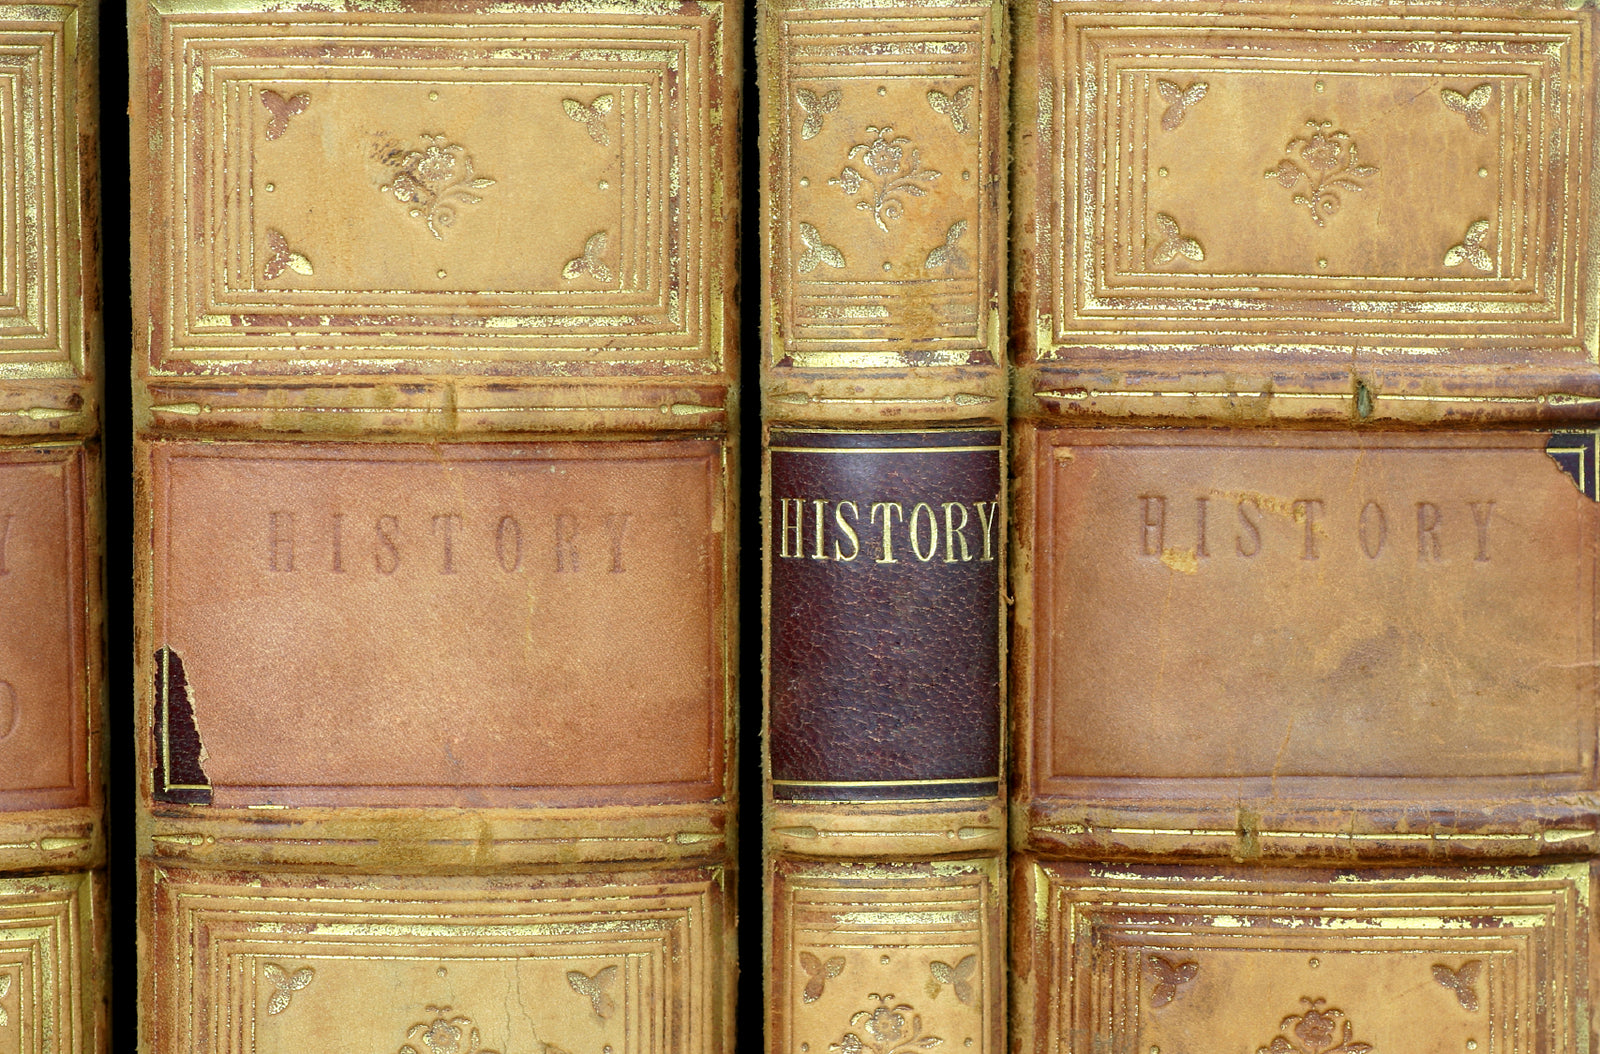 History - A to Z